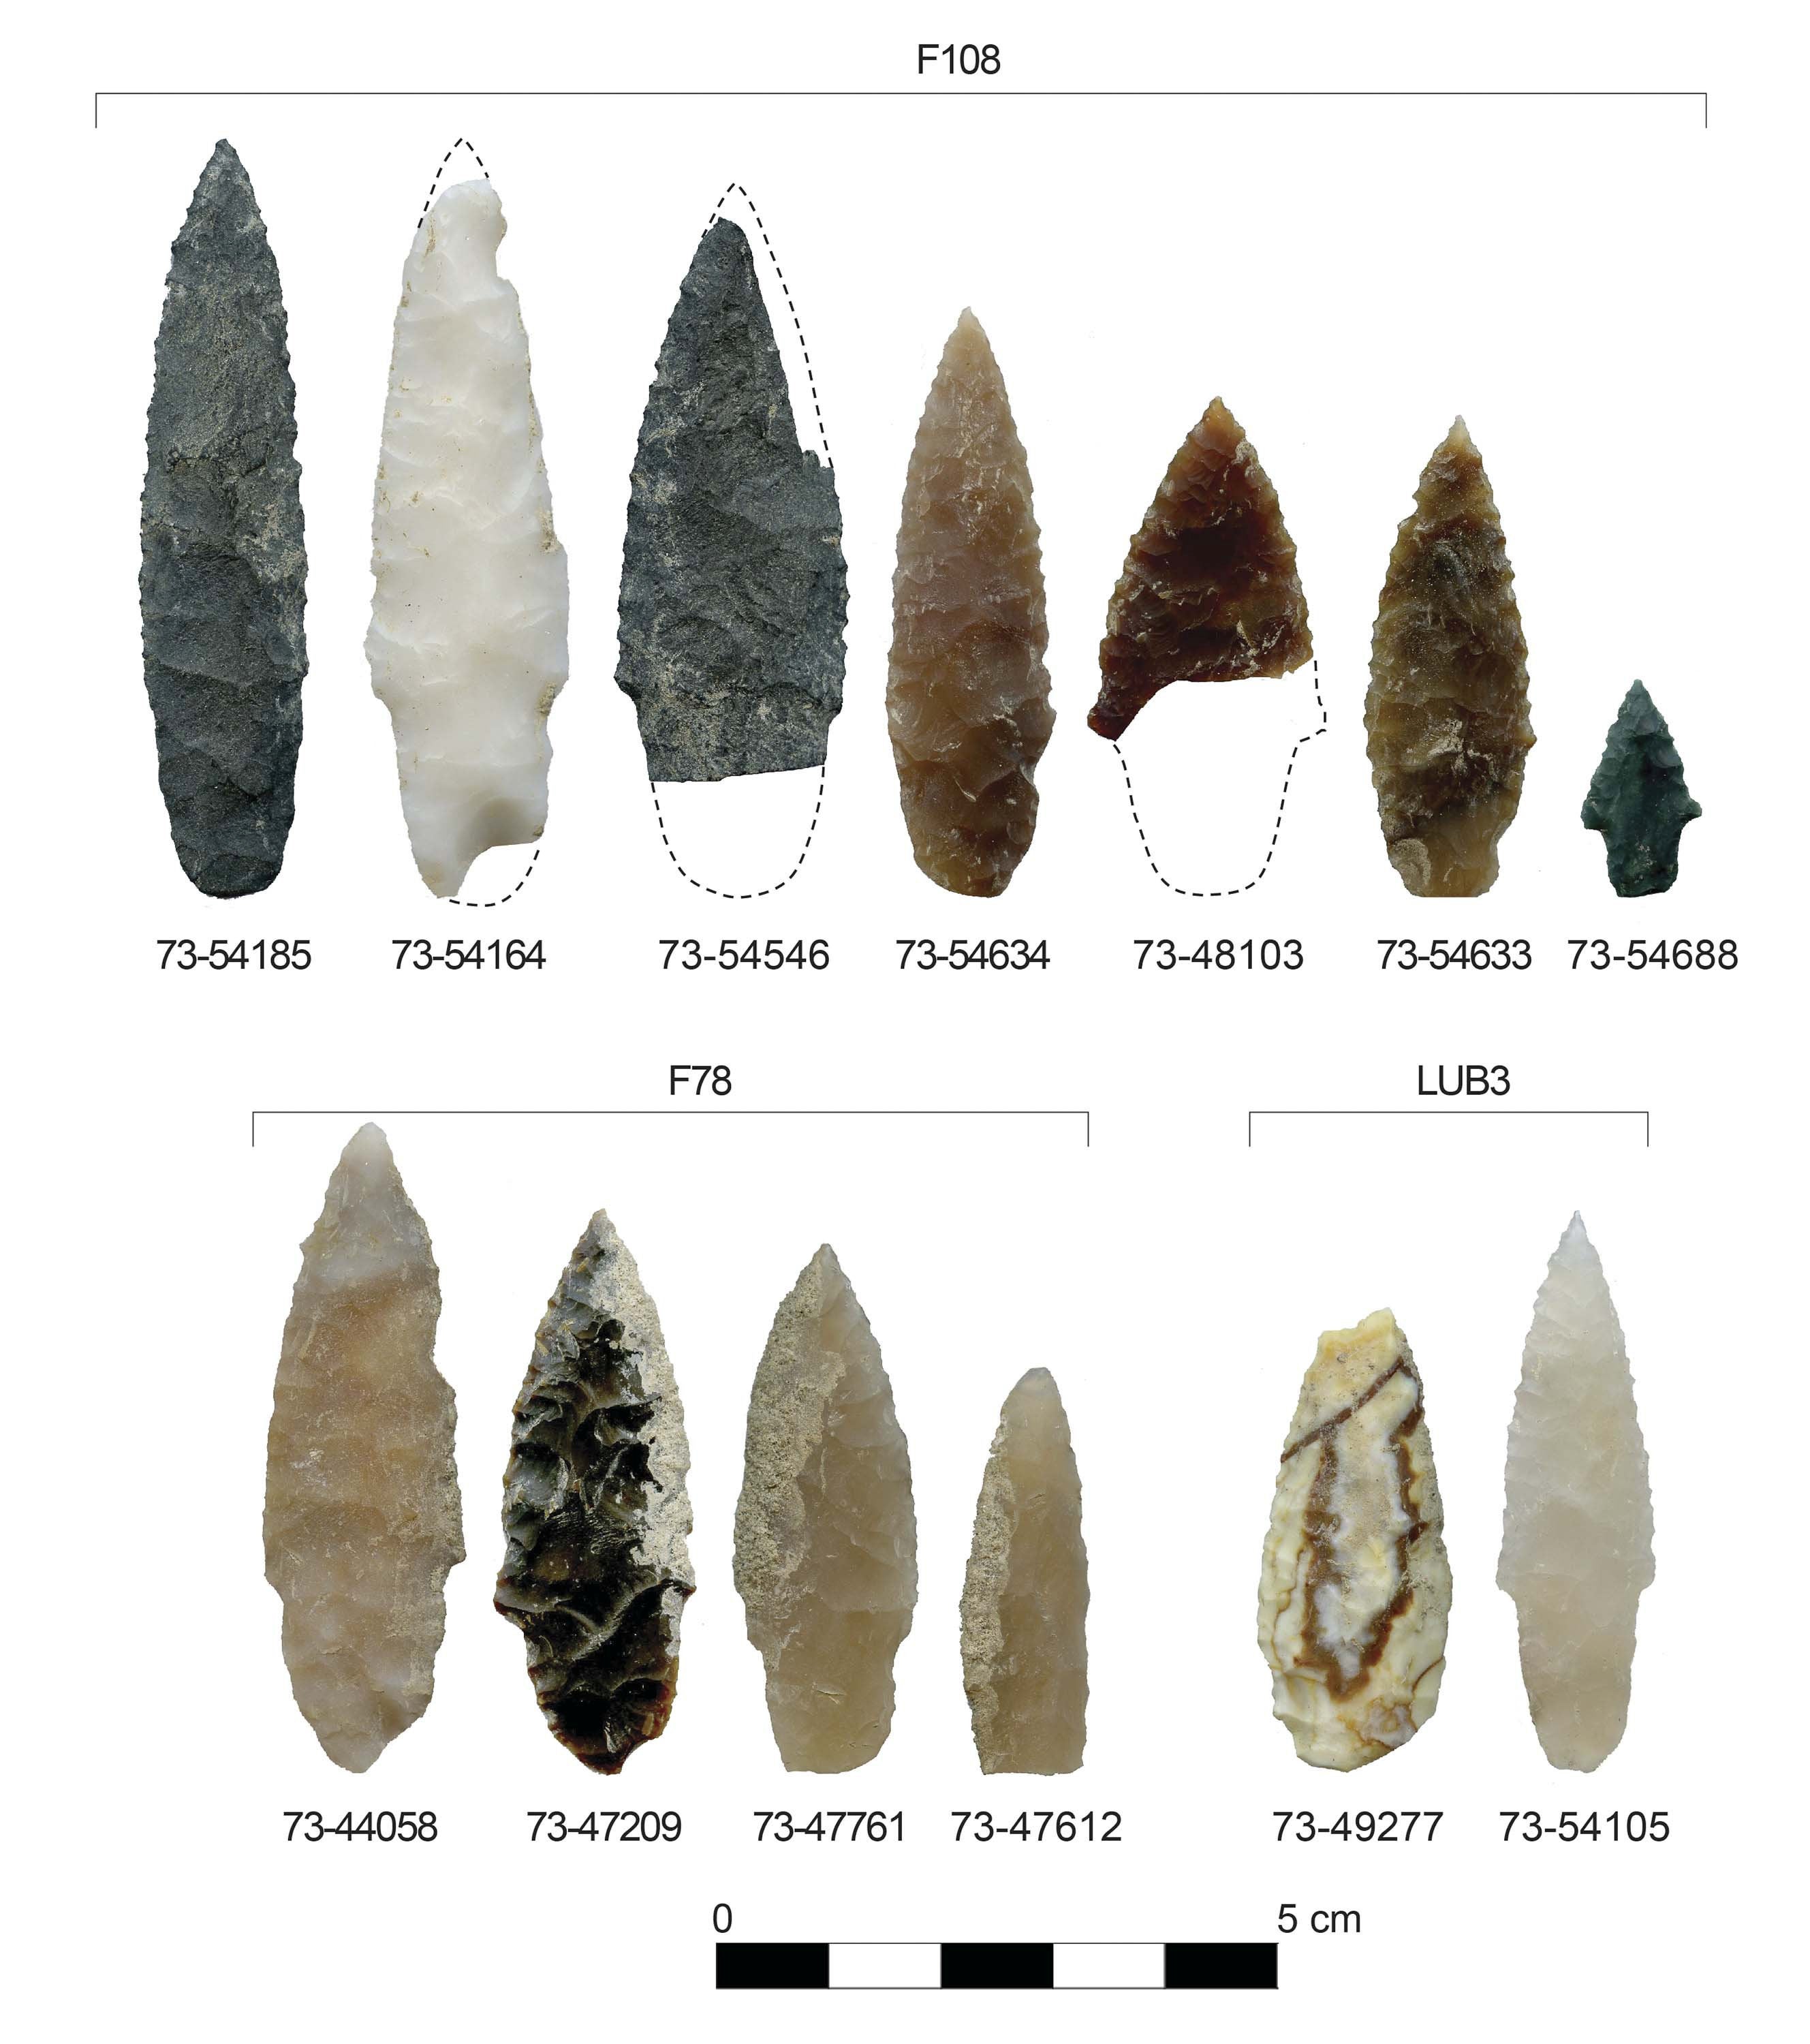 Stone projectile points discovered buried inside and outside of pit features